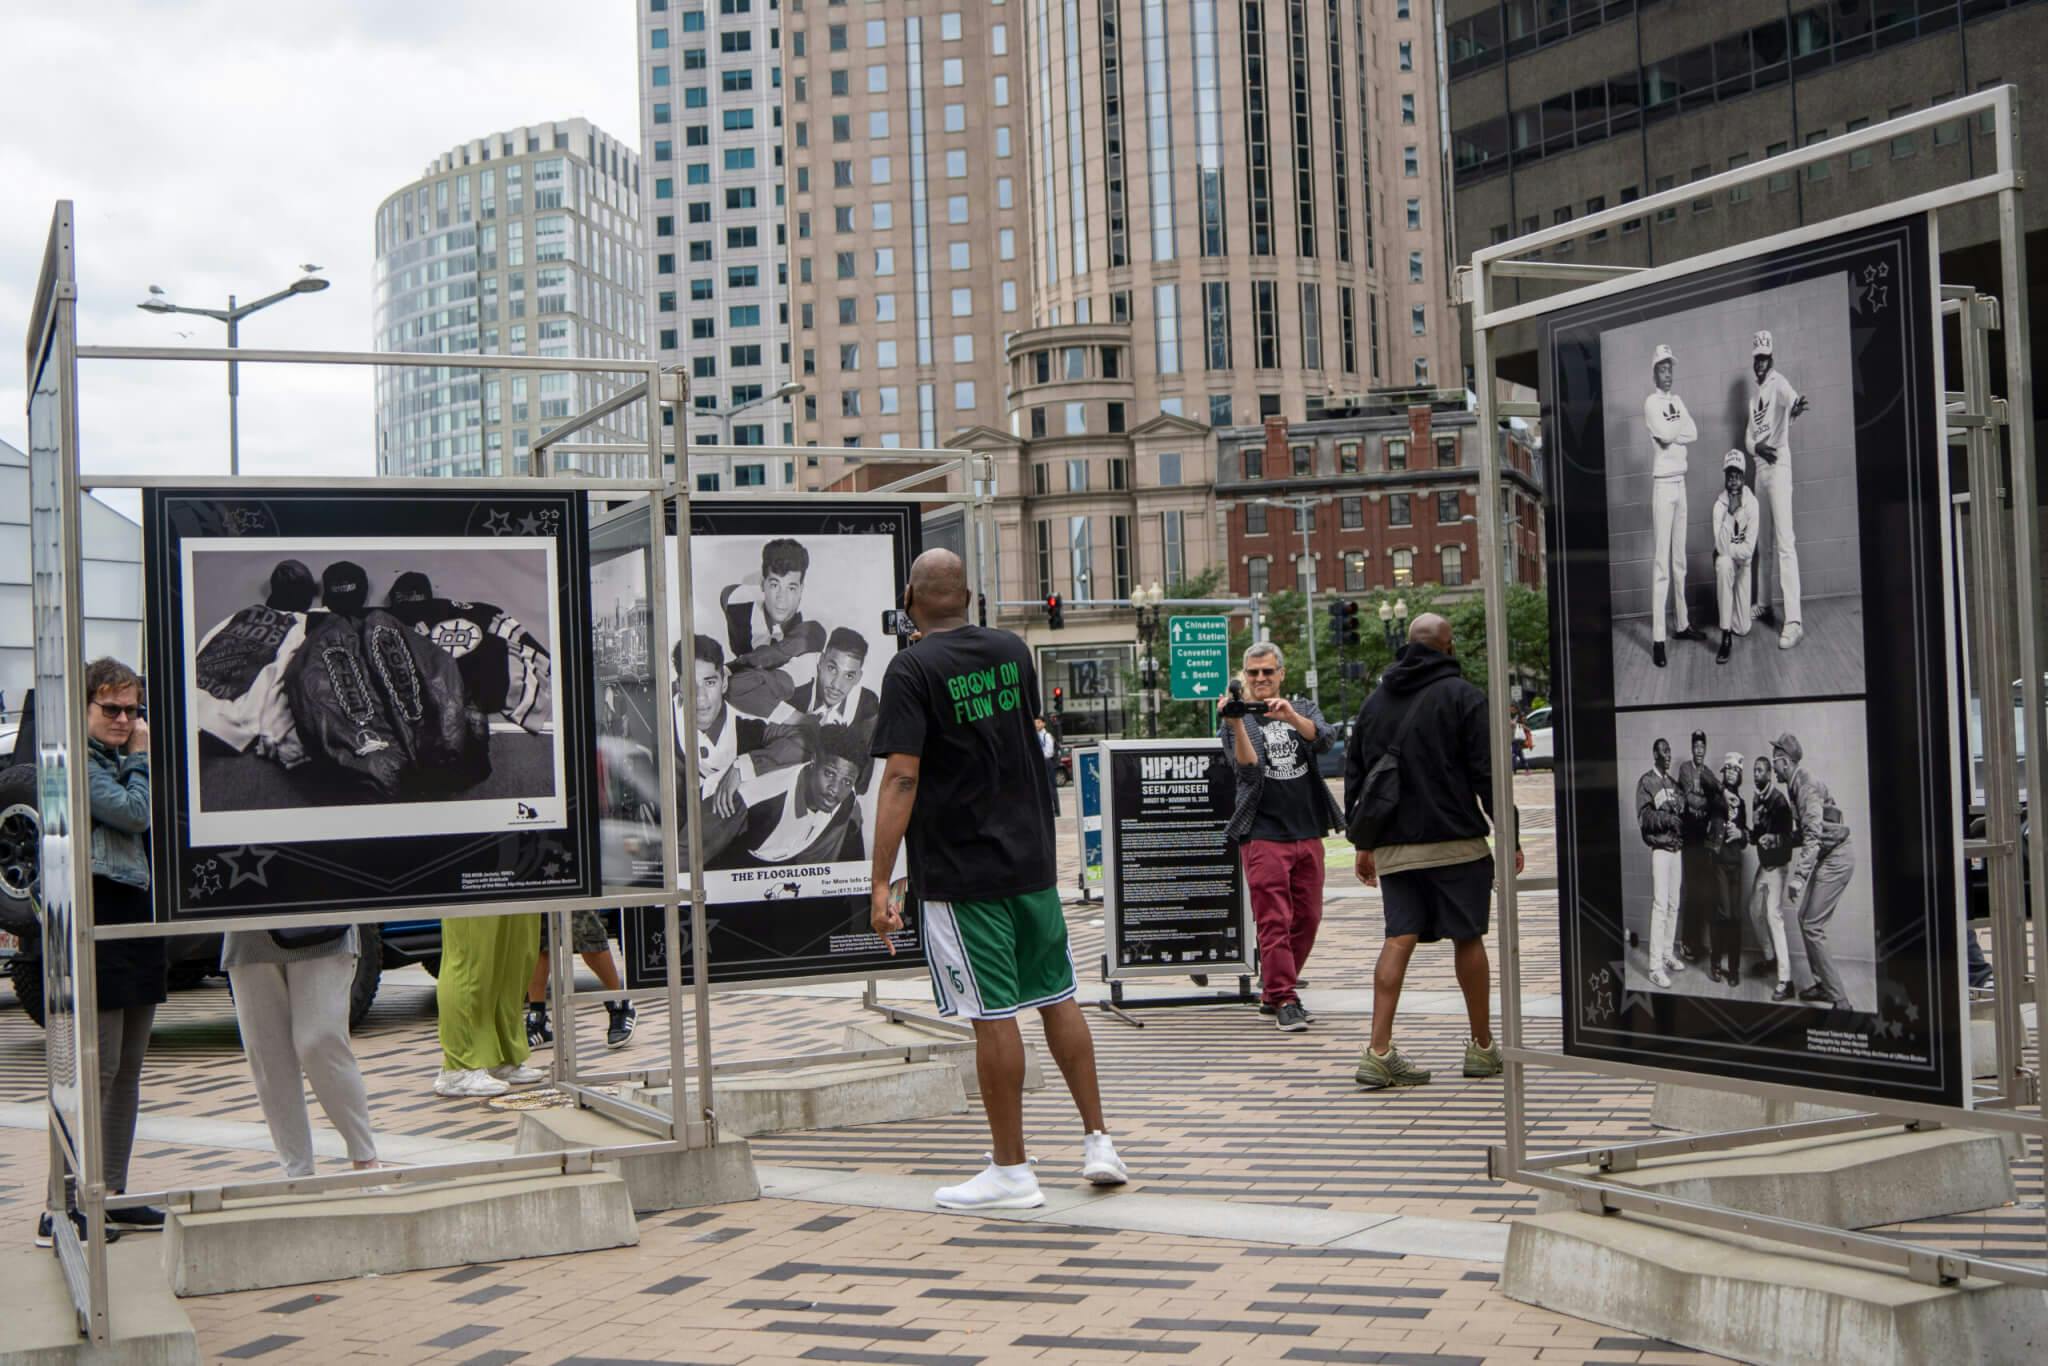 Installation view of “Hip-Hop: Seen/Unseen" at Dewey Square Plaza on The Greenway, with people looking at the photos on display